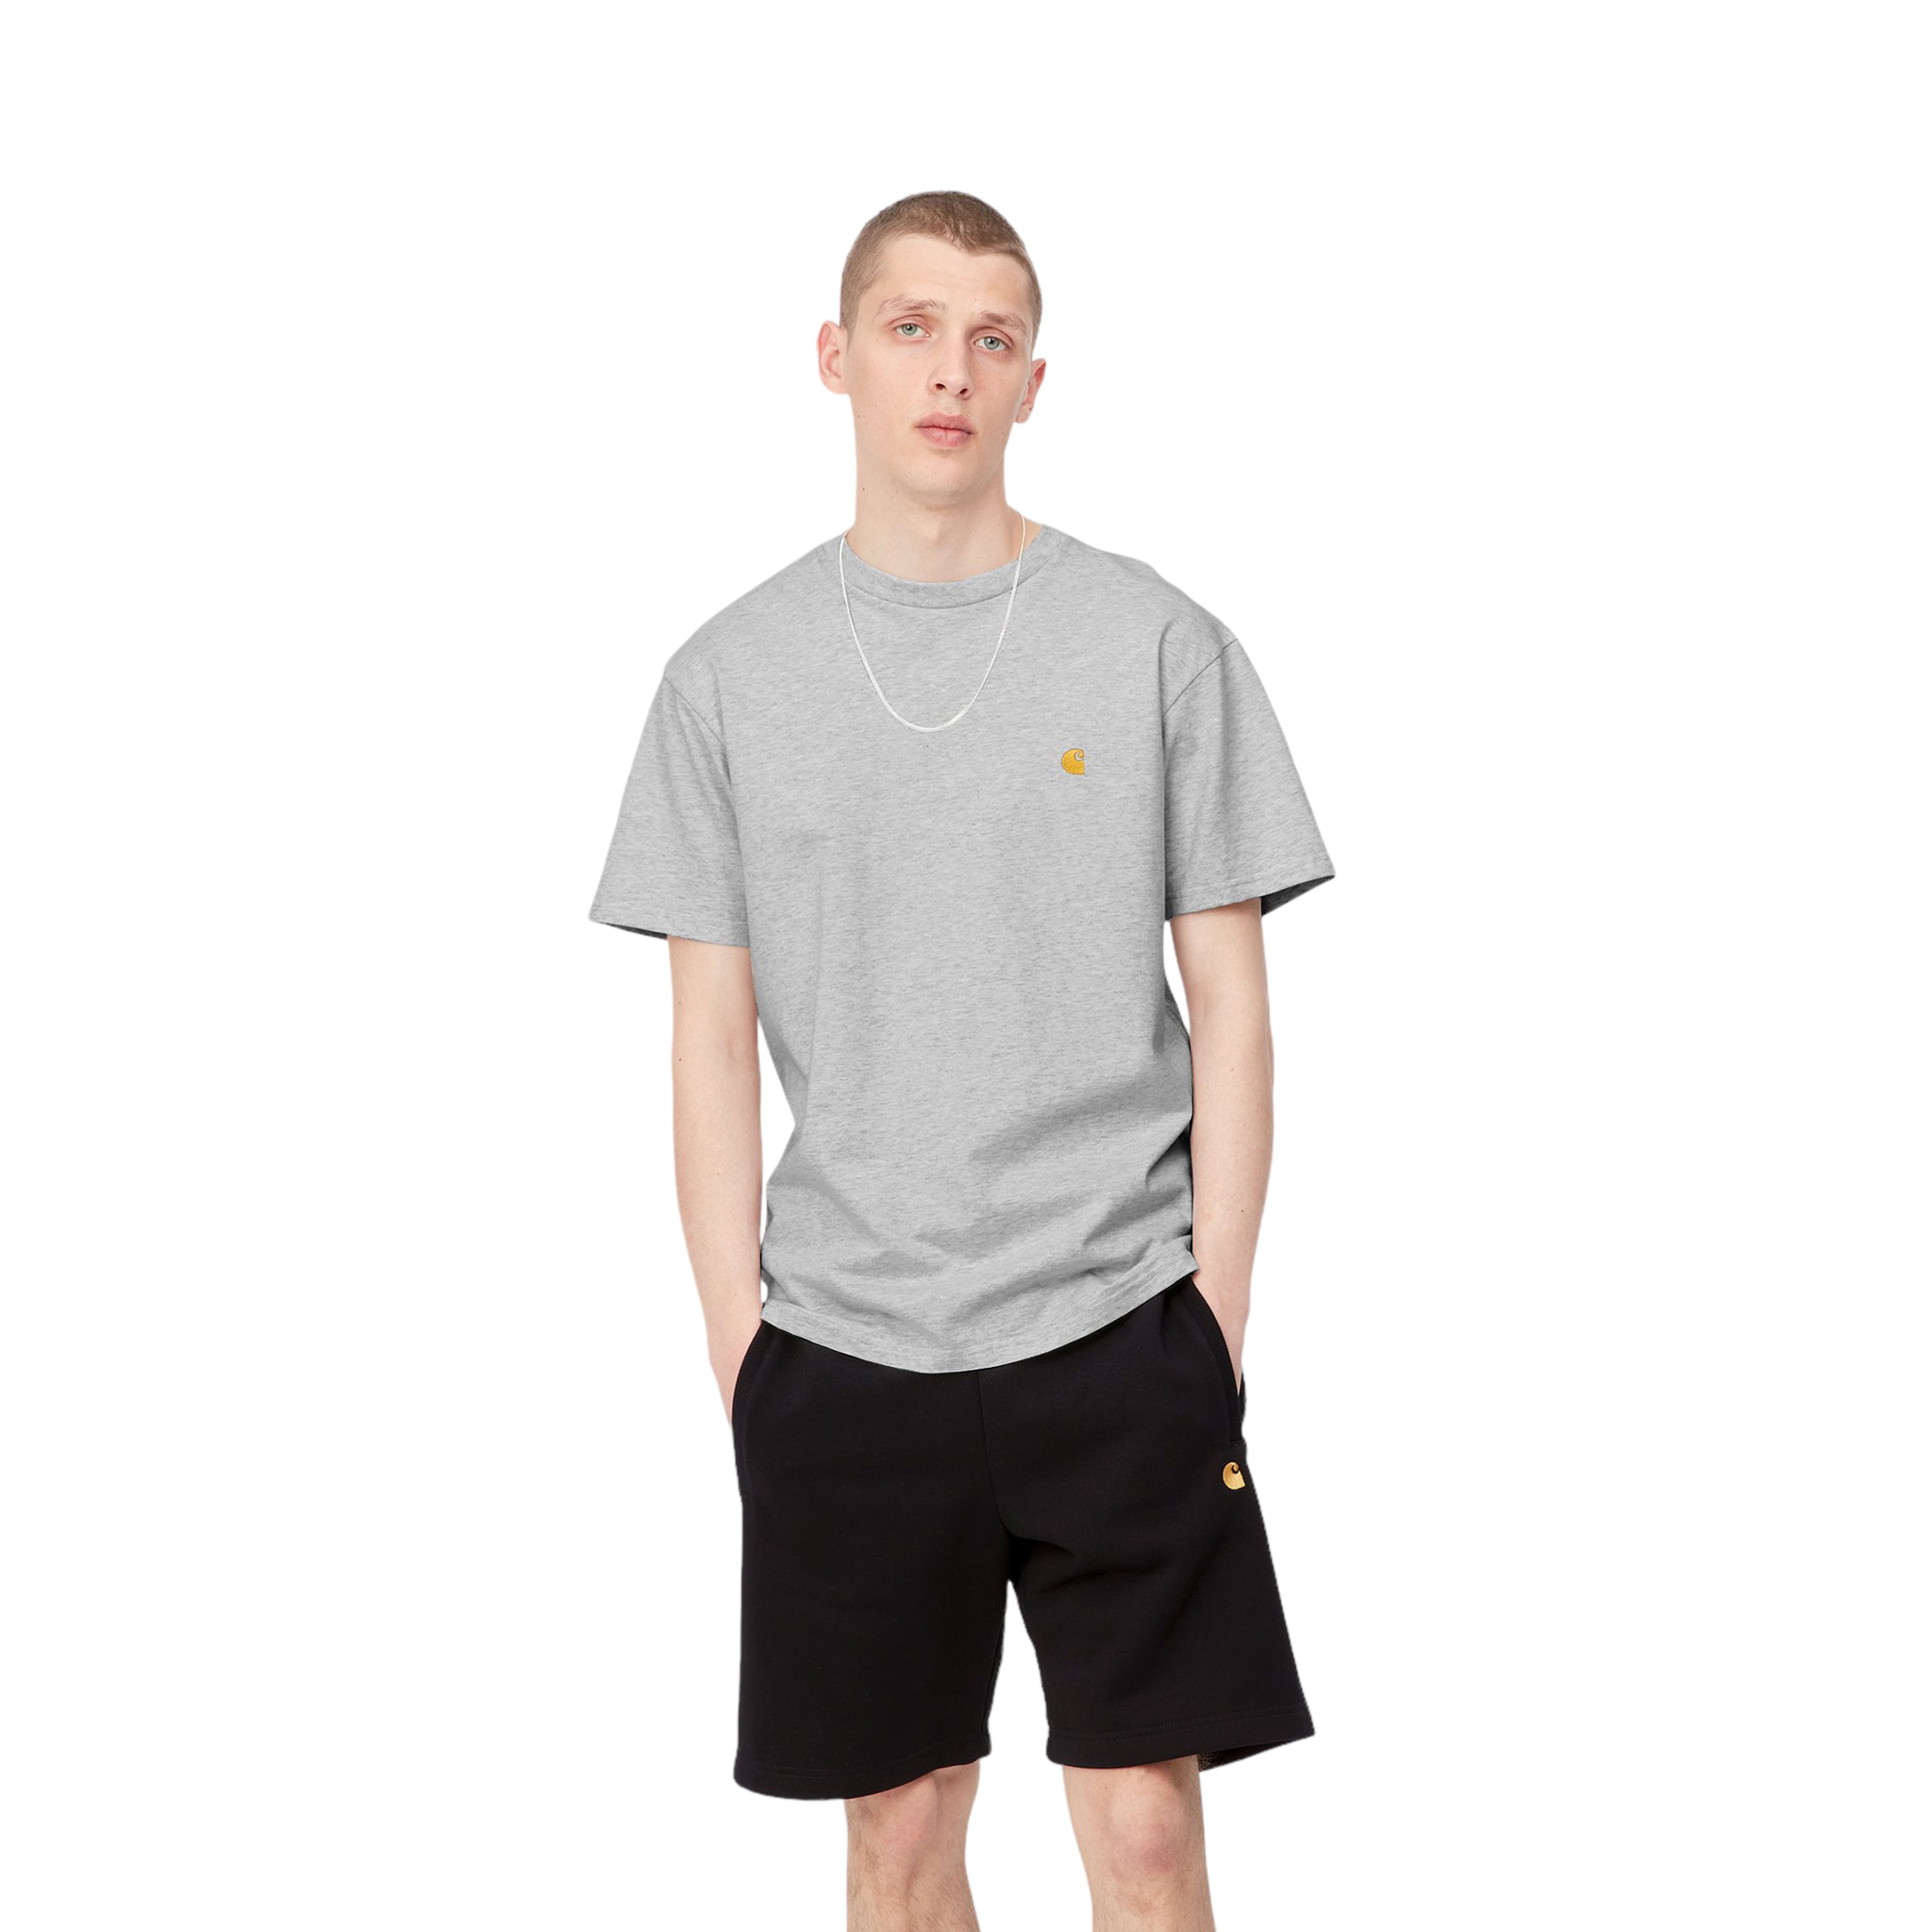 Carhartt S/S Chase T-Shirt - Ash Heather/Gold